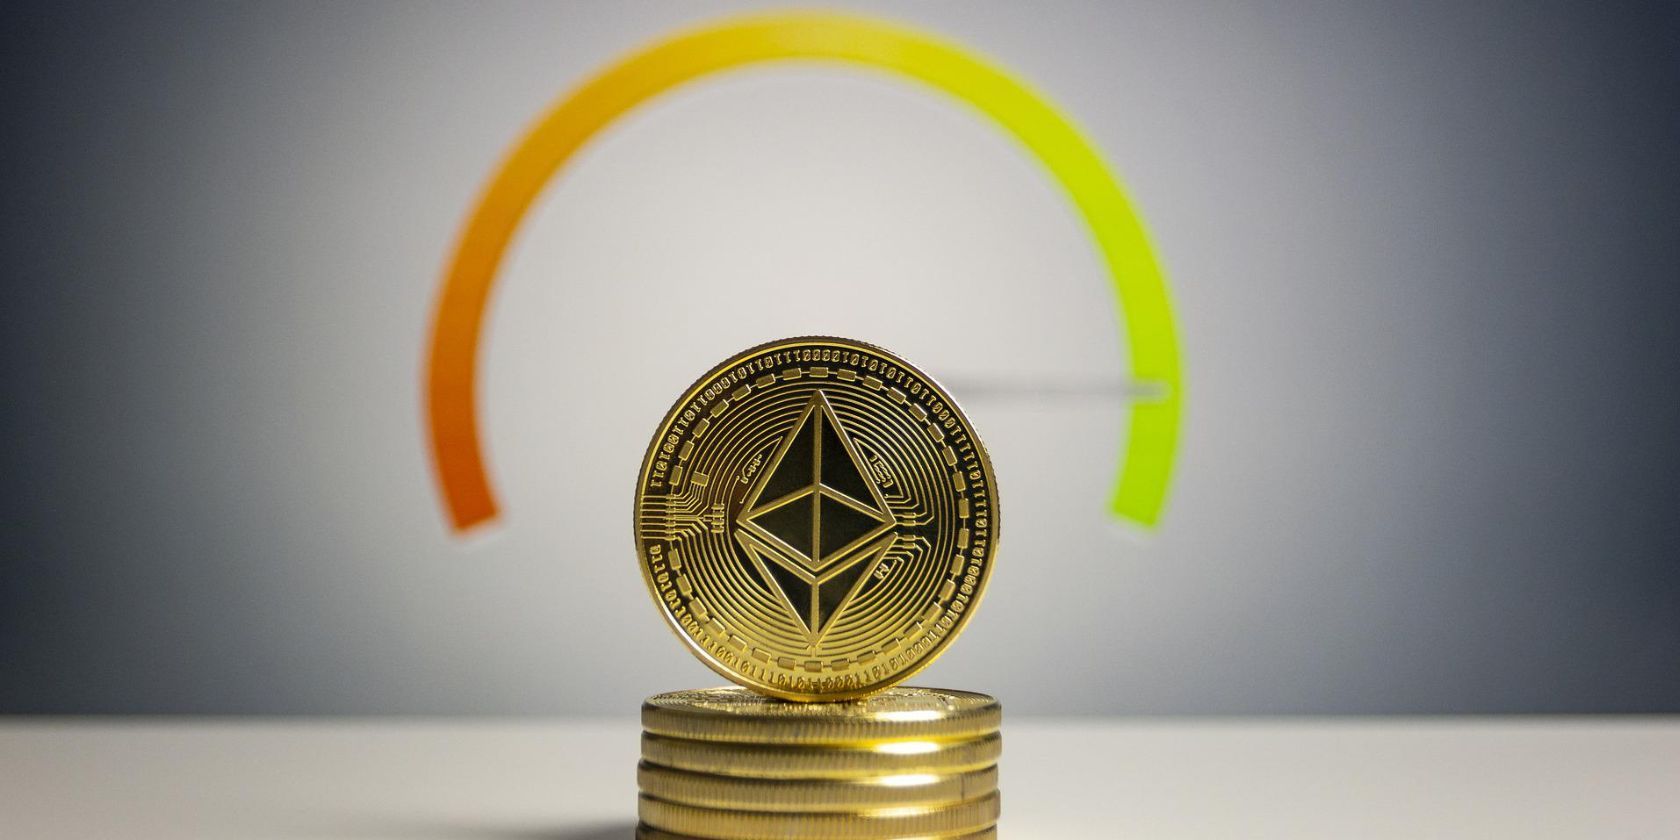 stack of ethereum coins in front of meter